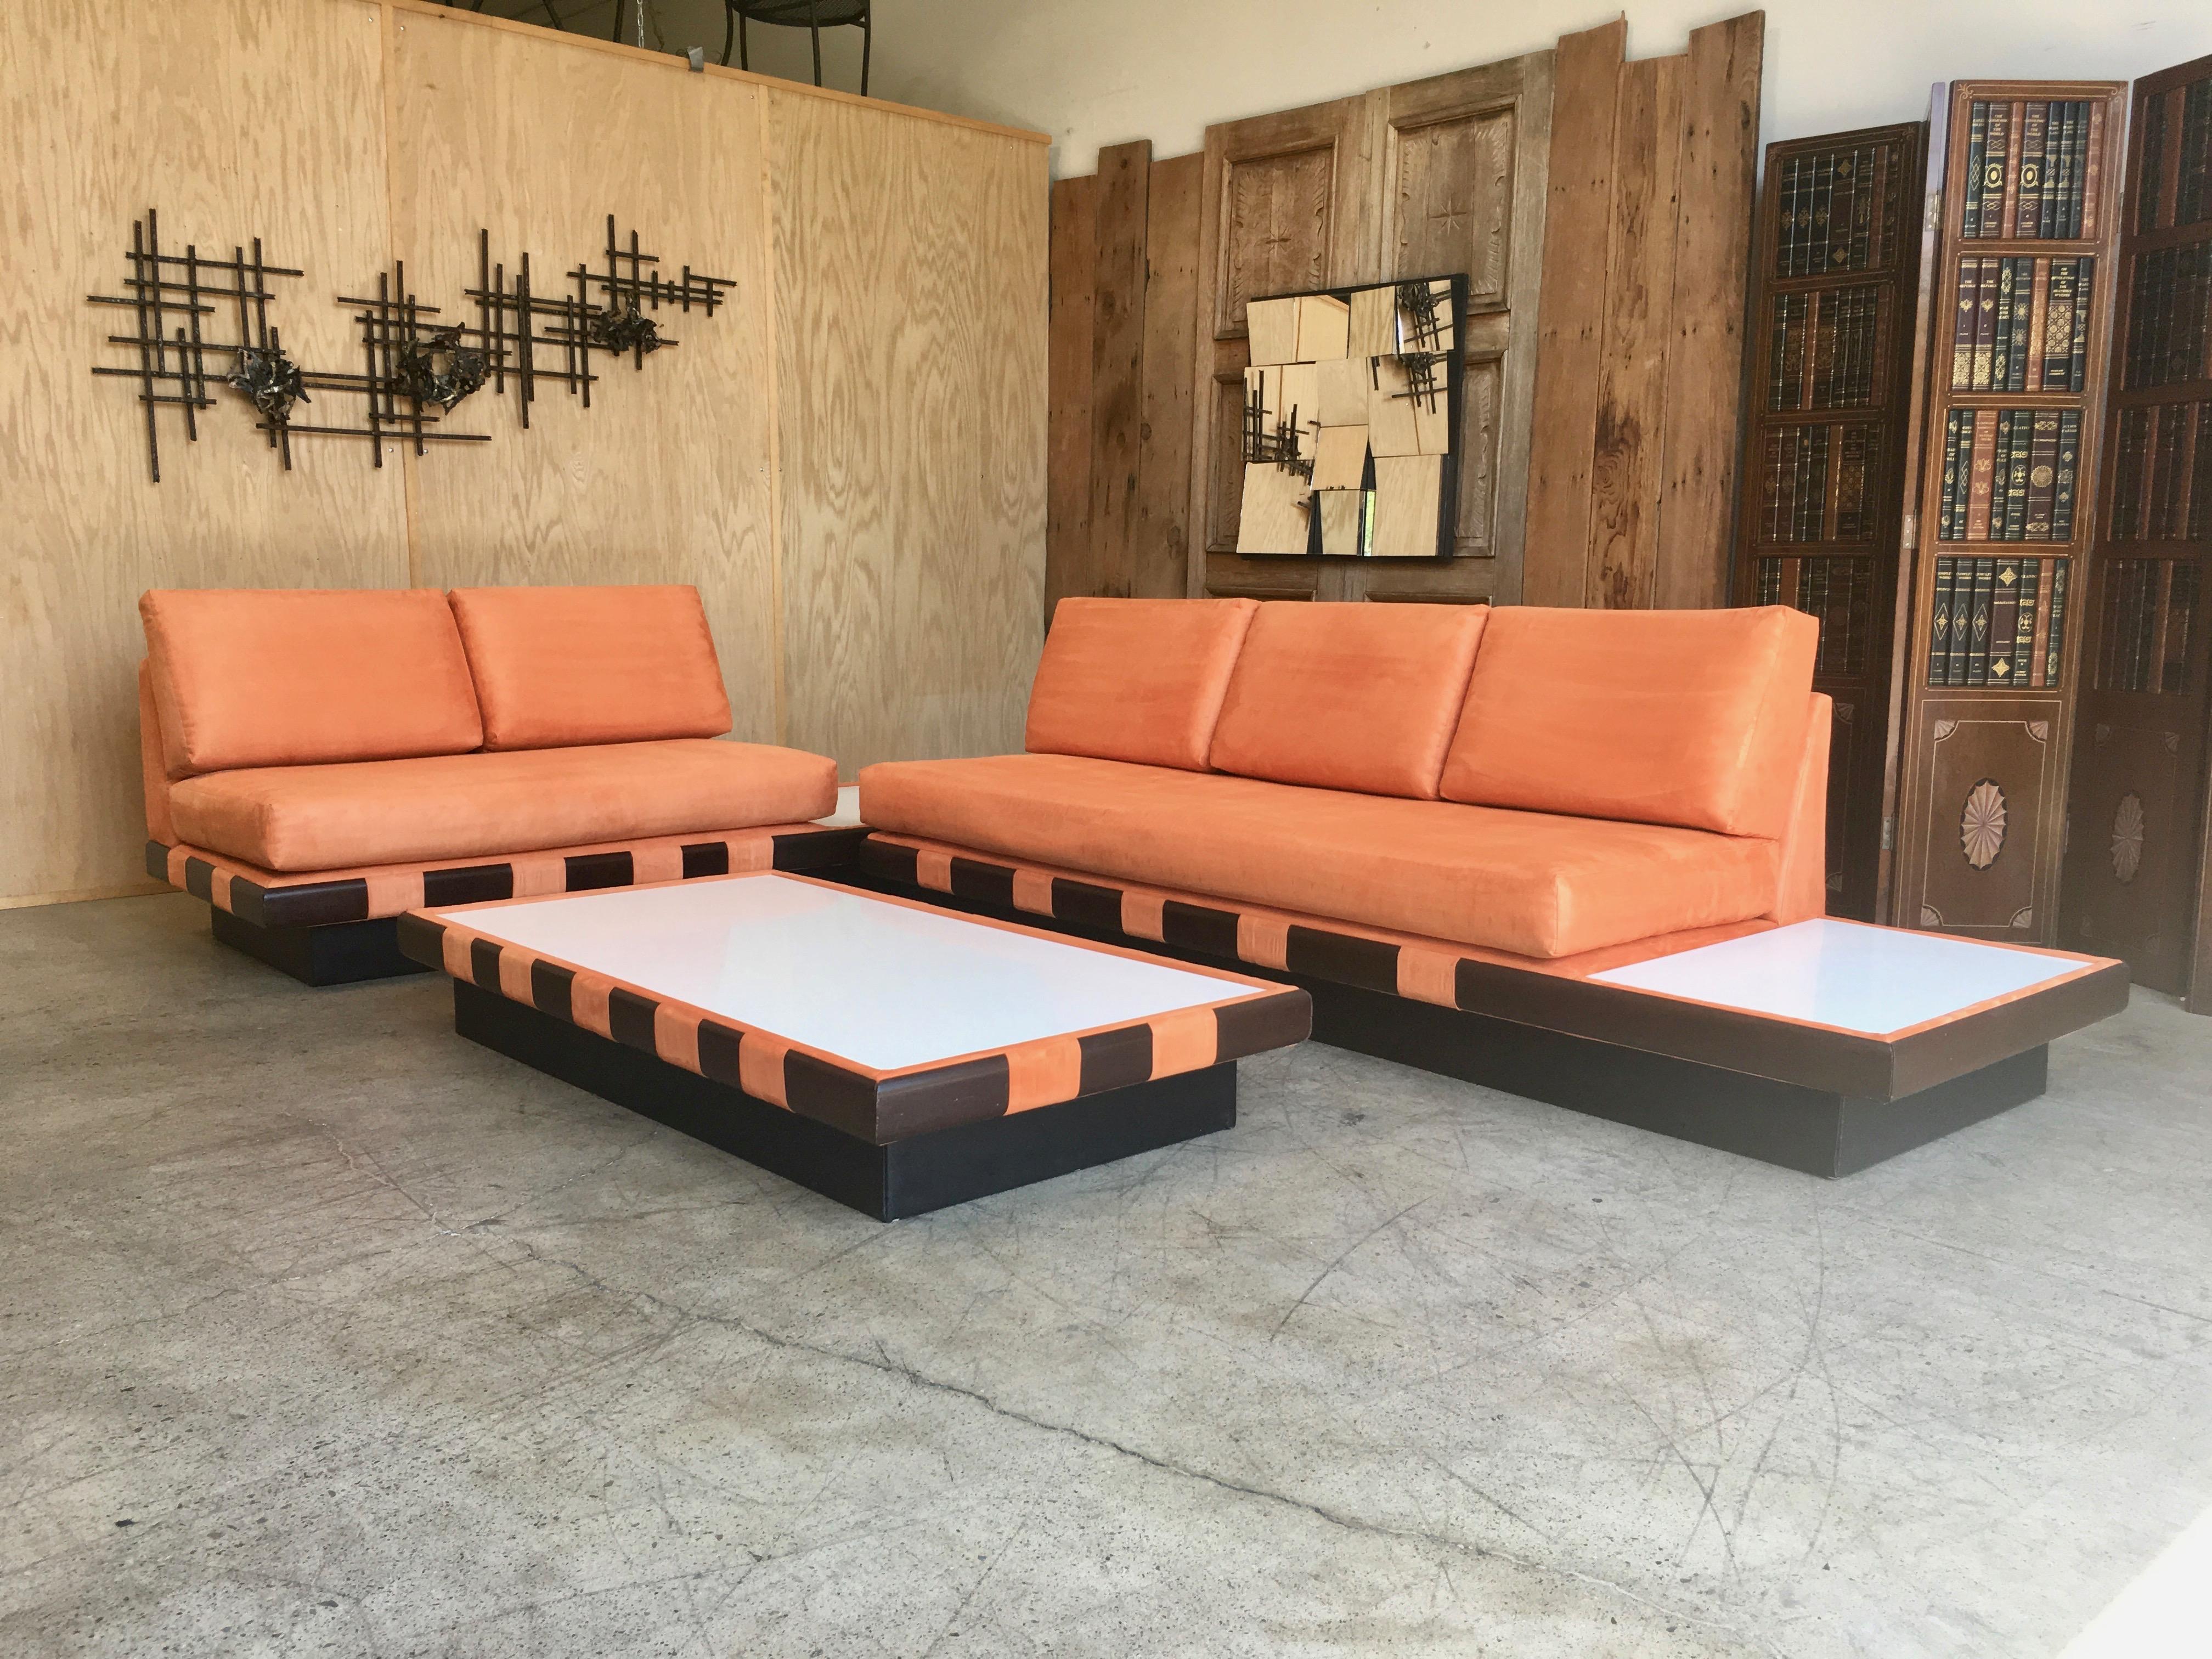 Three-piece set with one three seat, one two seat and one coffee table
recently recovered in orange micro fiber with white quartz table tops and black vinyl plinth.
The three-seat is 103.5